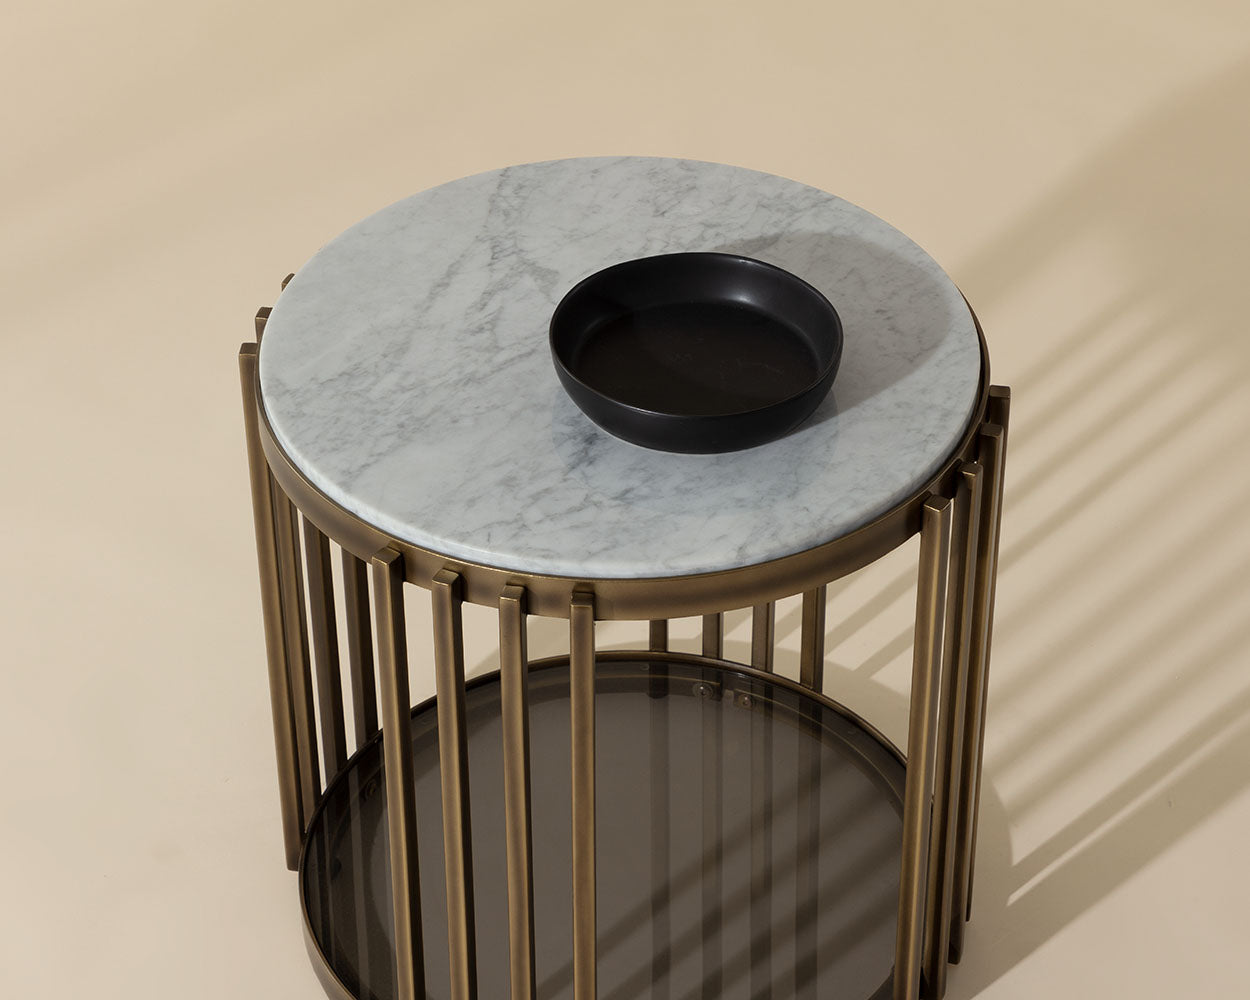 Naxos Side Table